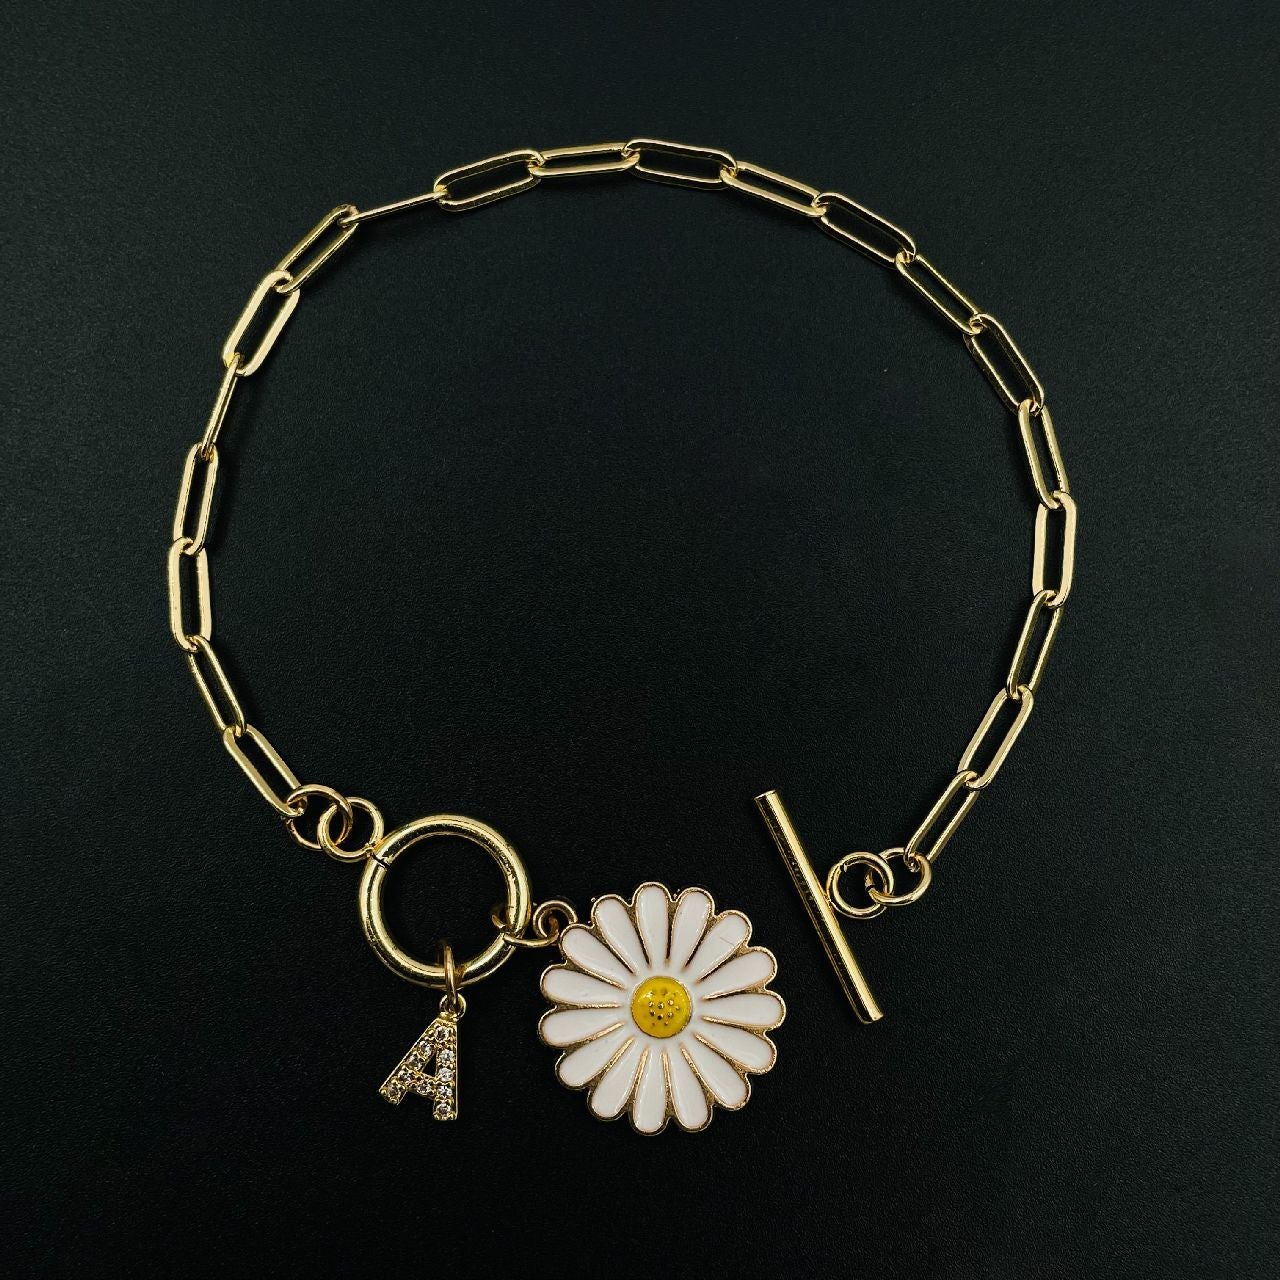 Copper White Yellow Gold Alphabet Initial Customized Letter Fun Daisy Flower Charms Chain Link Bracelet For Women Girls